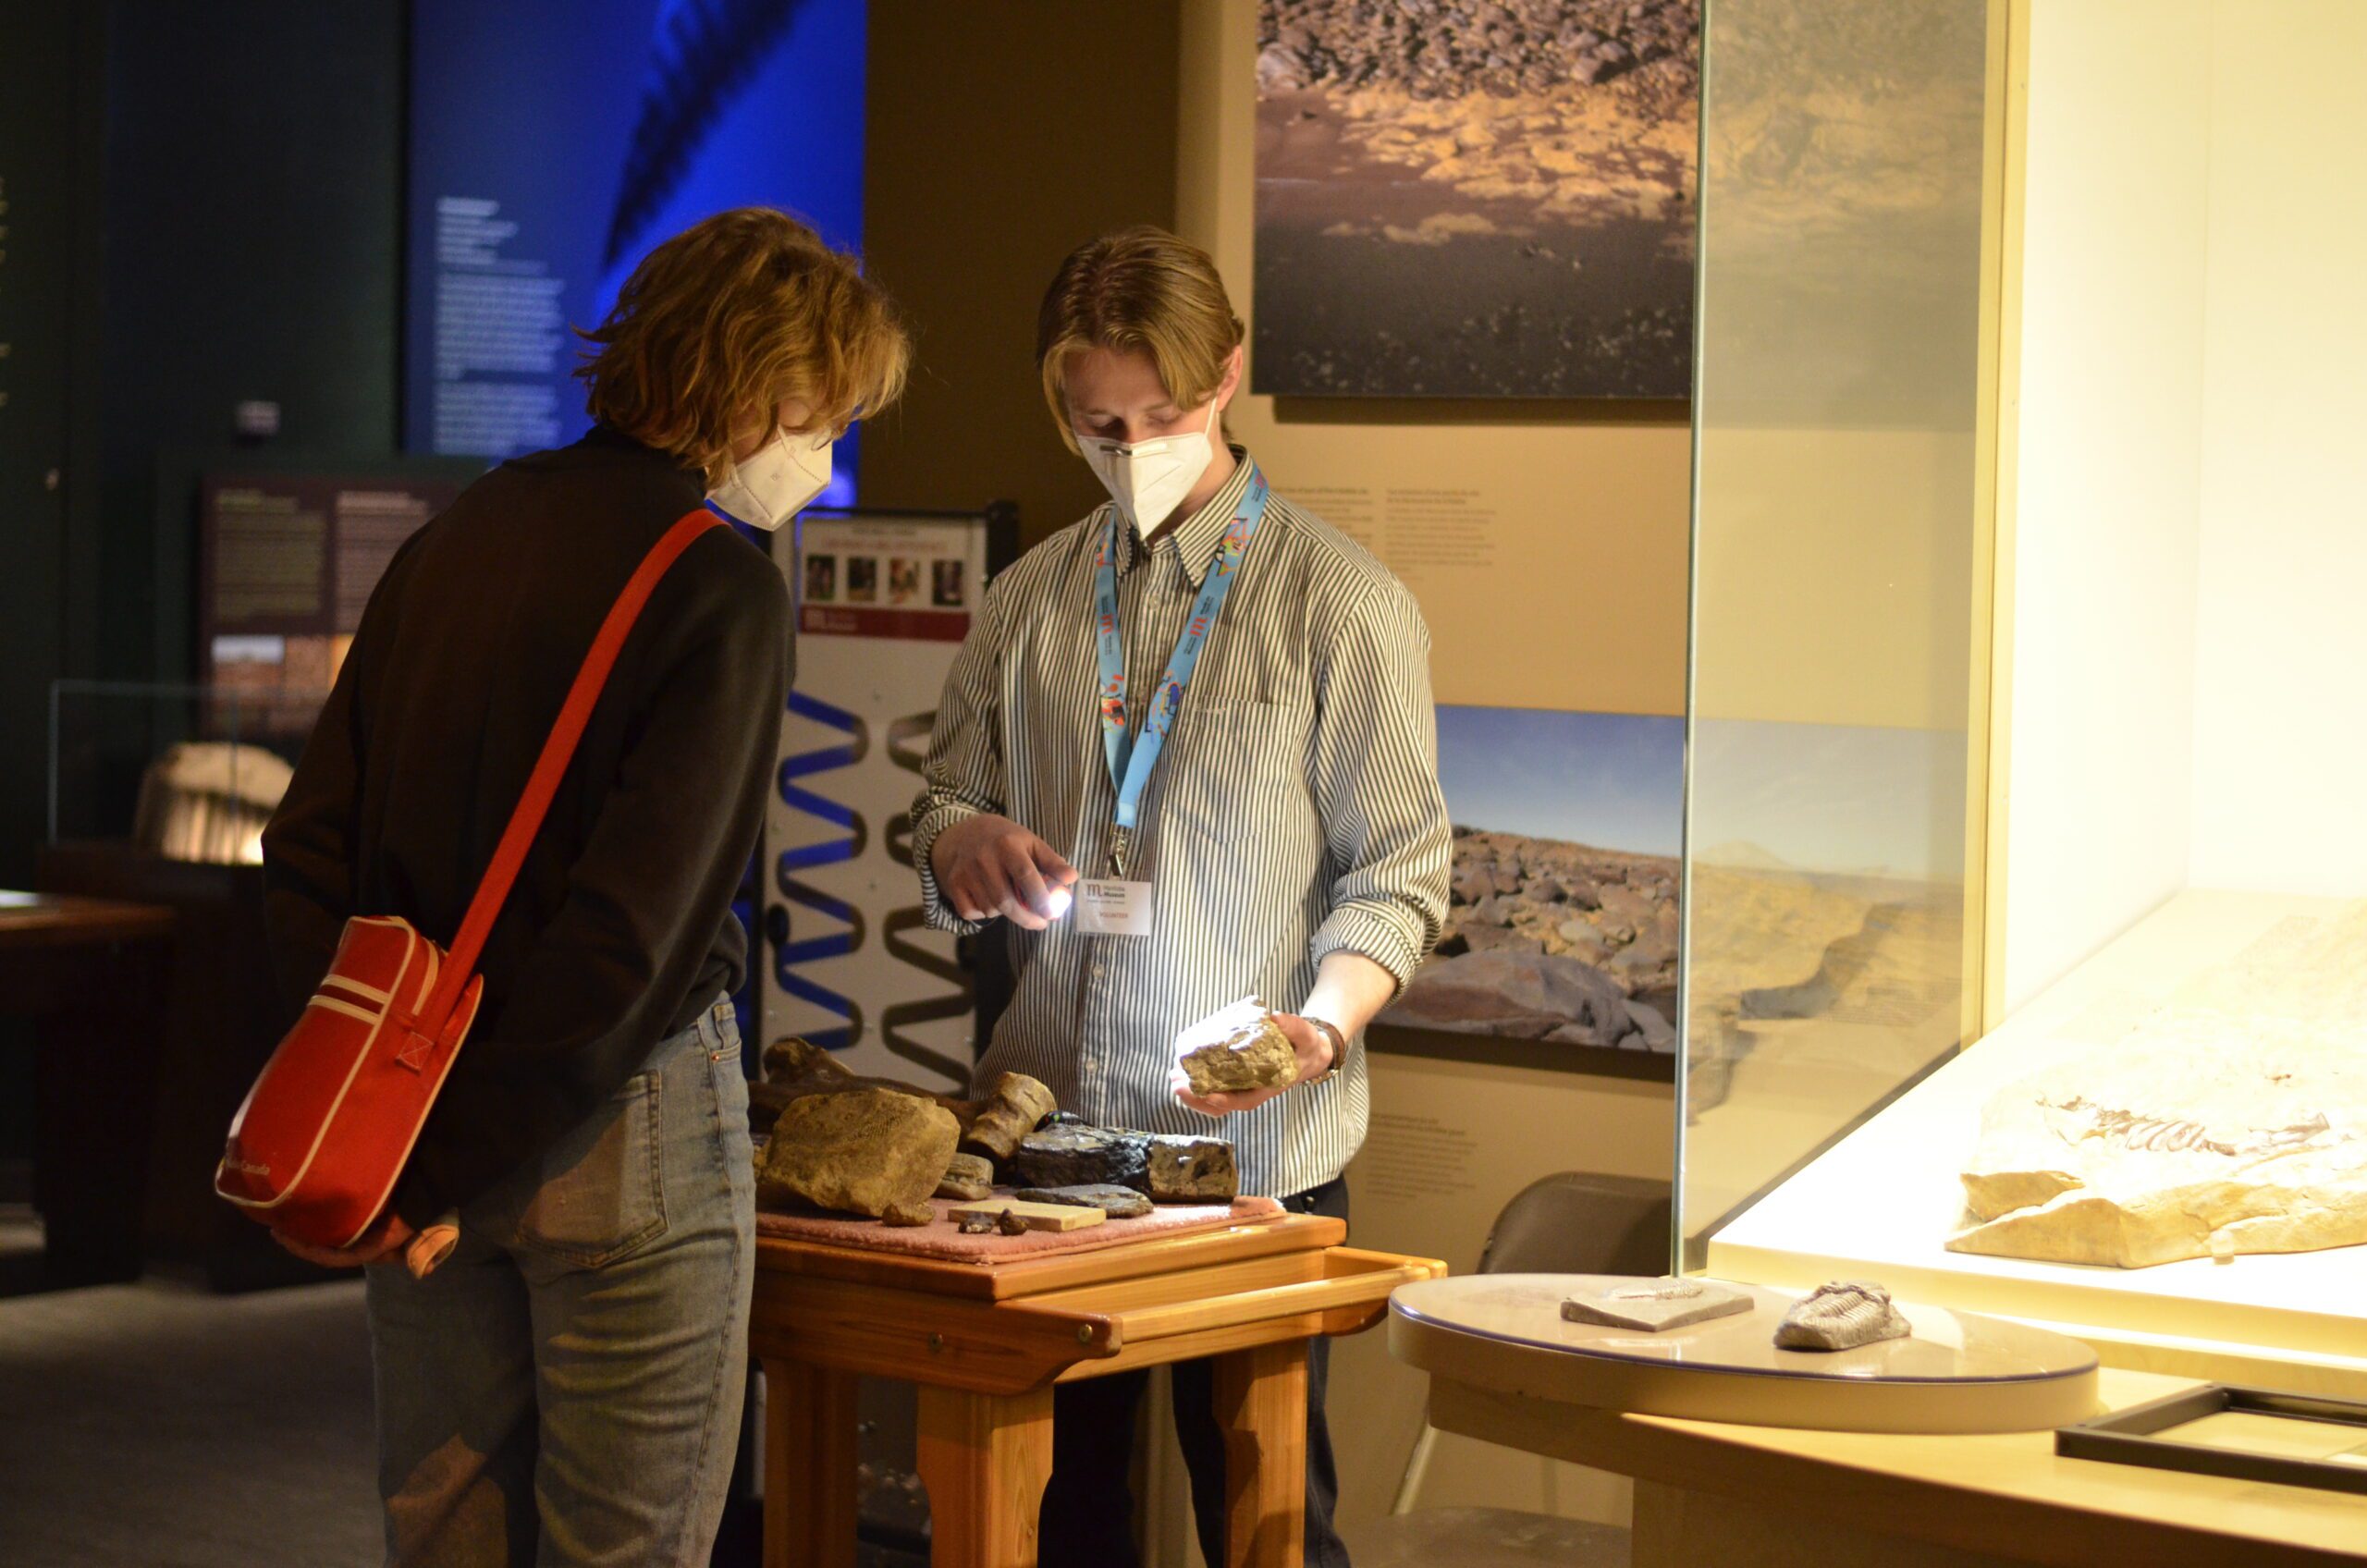 A Museum Volunteer standing behind a rolling cart containing a number of fossil specimens. The Volunteer is shining a flashlight on one specimen, showing the fossil to a visitor.